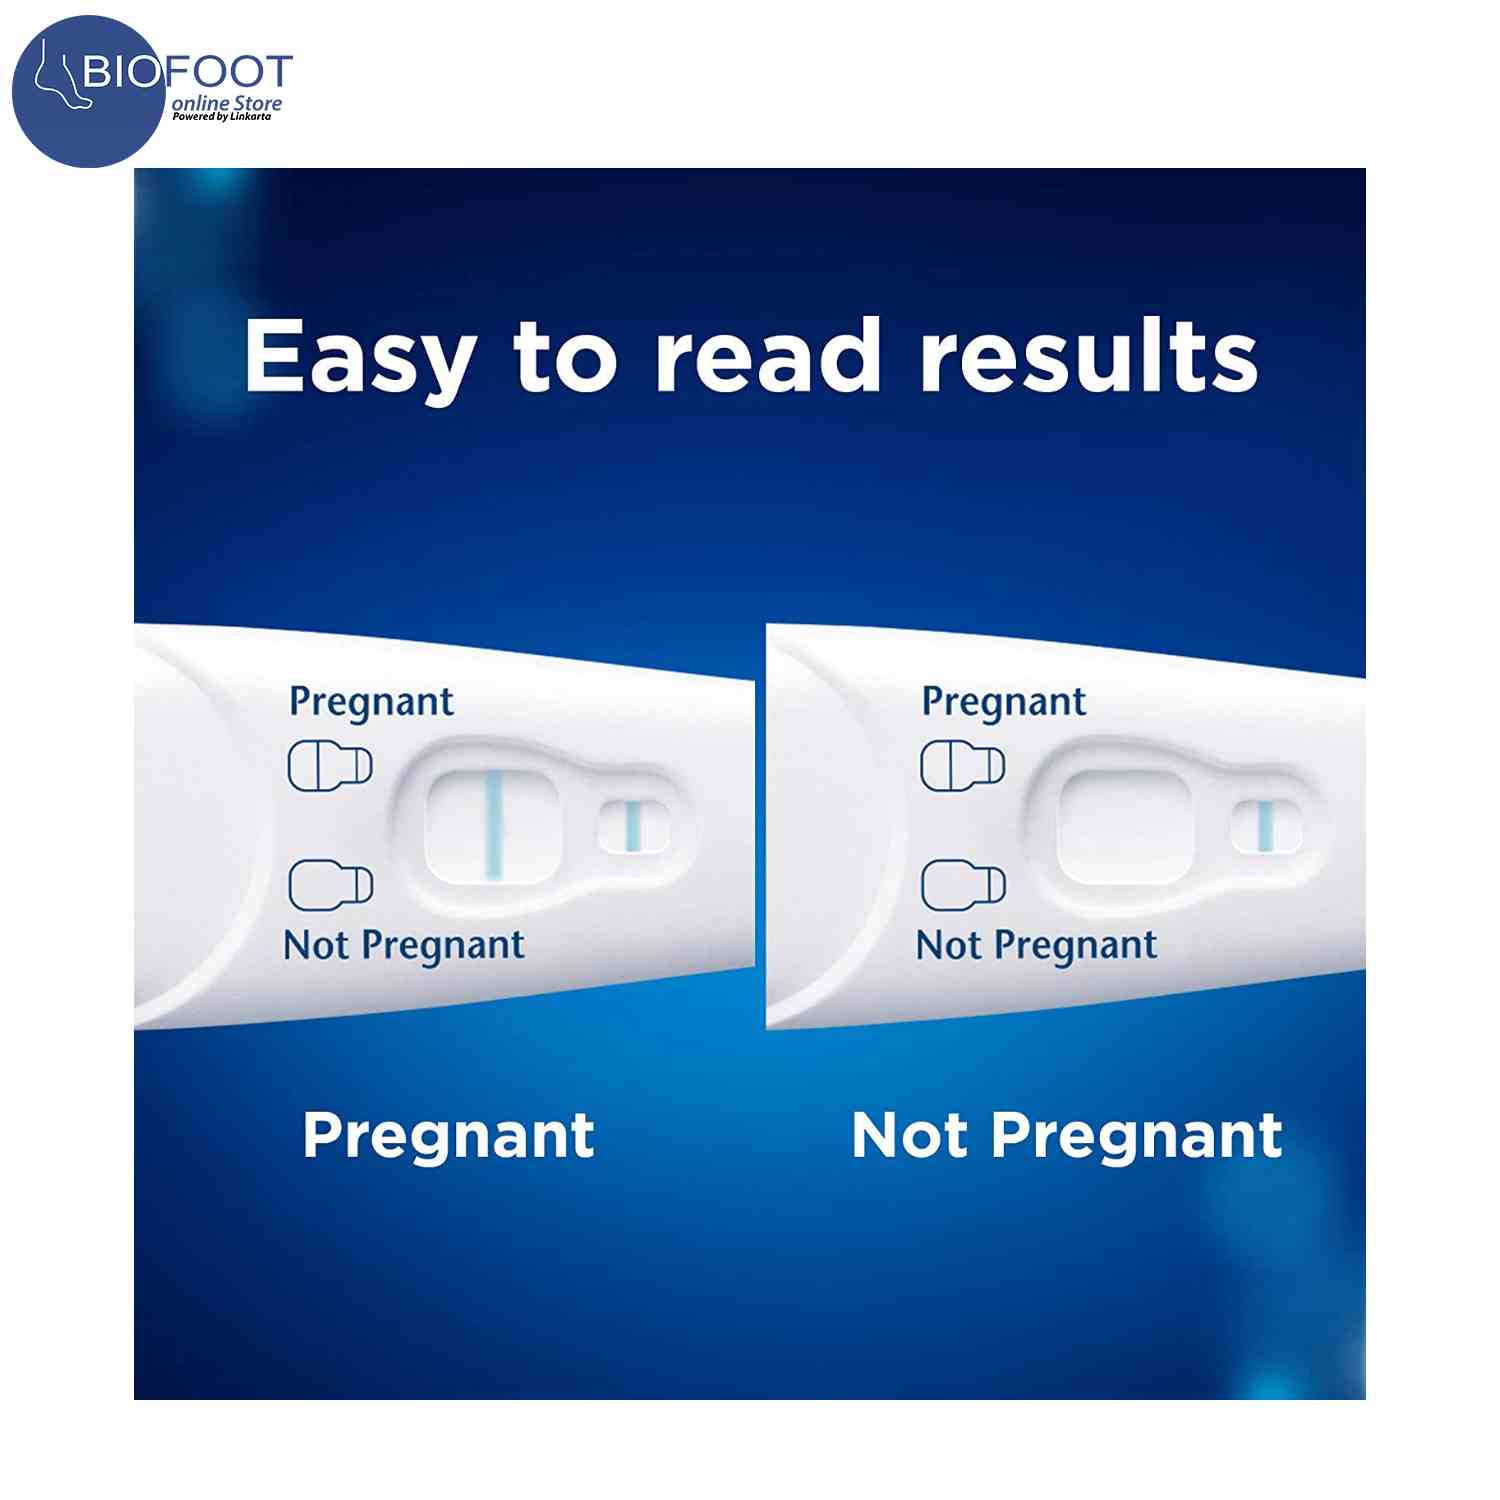 Clear Blue Ultra Early Pregnancy Test